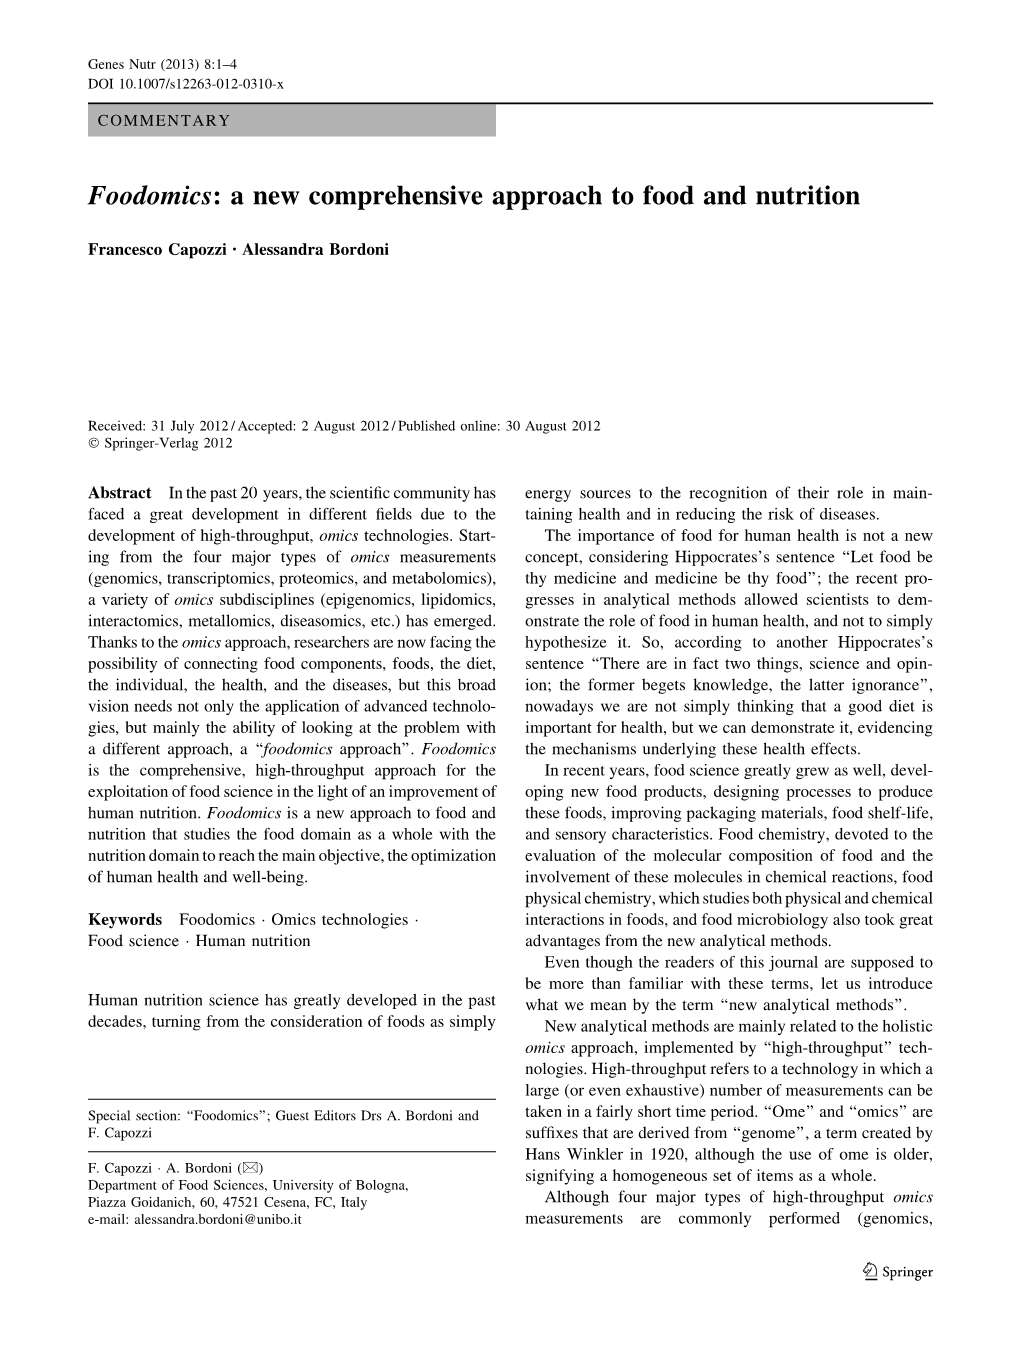 Foodomics: a New Comprehensive Approach to Food and Nutrition